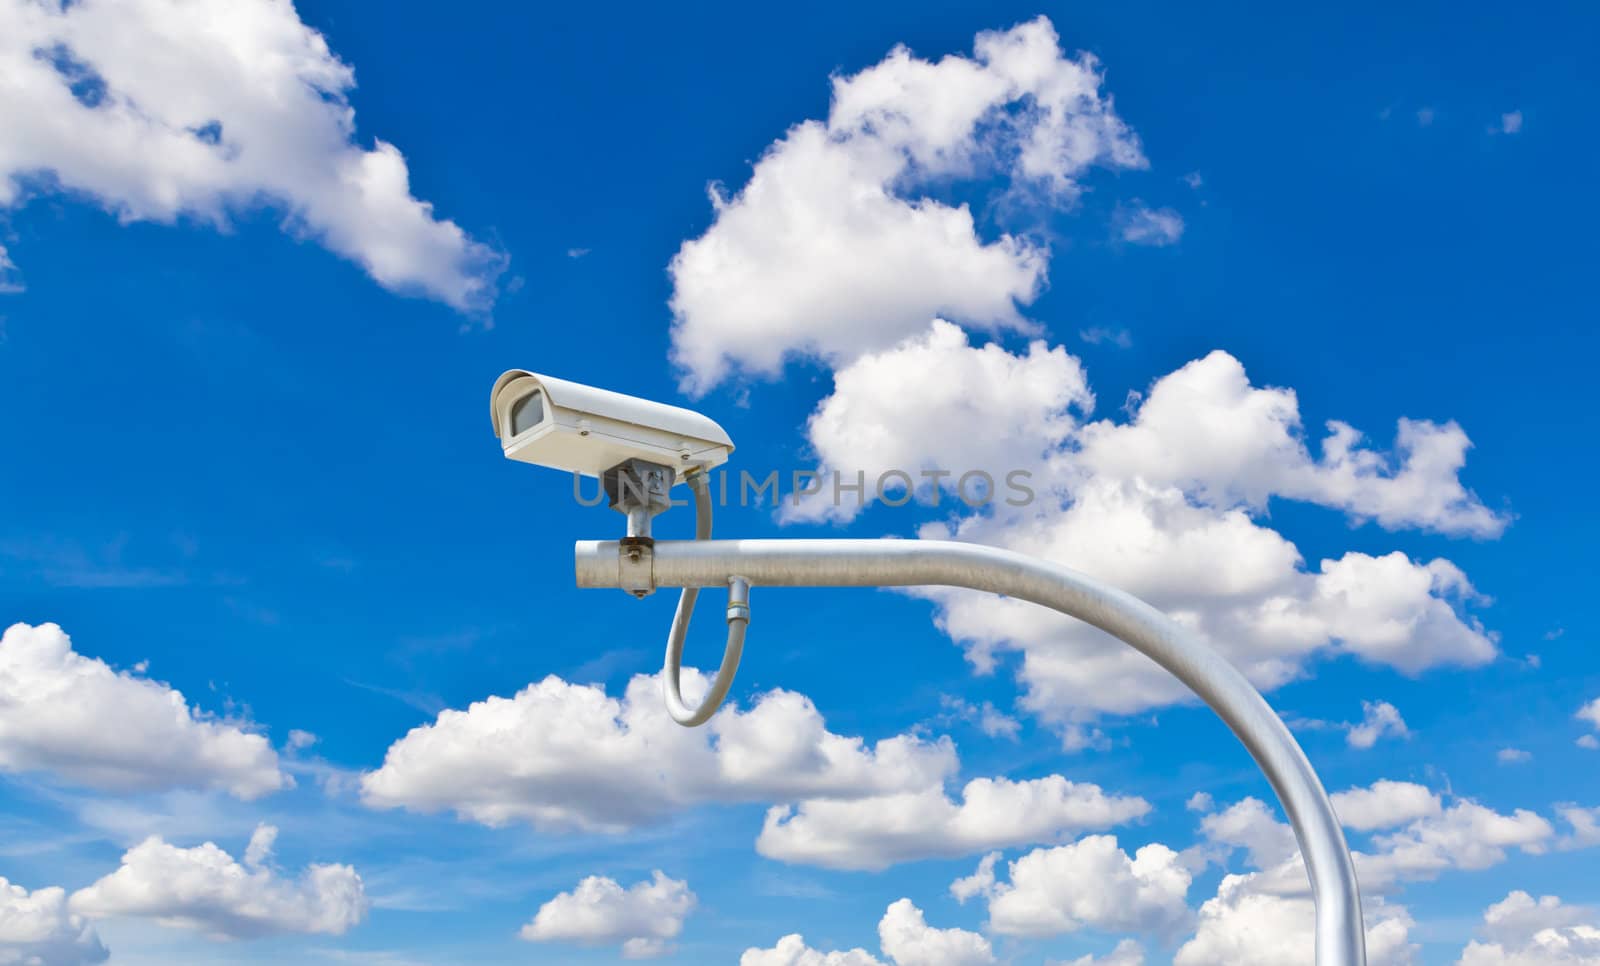 outdoor cctv camera against blue sky by tungphoto